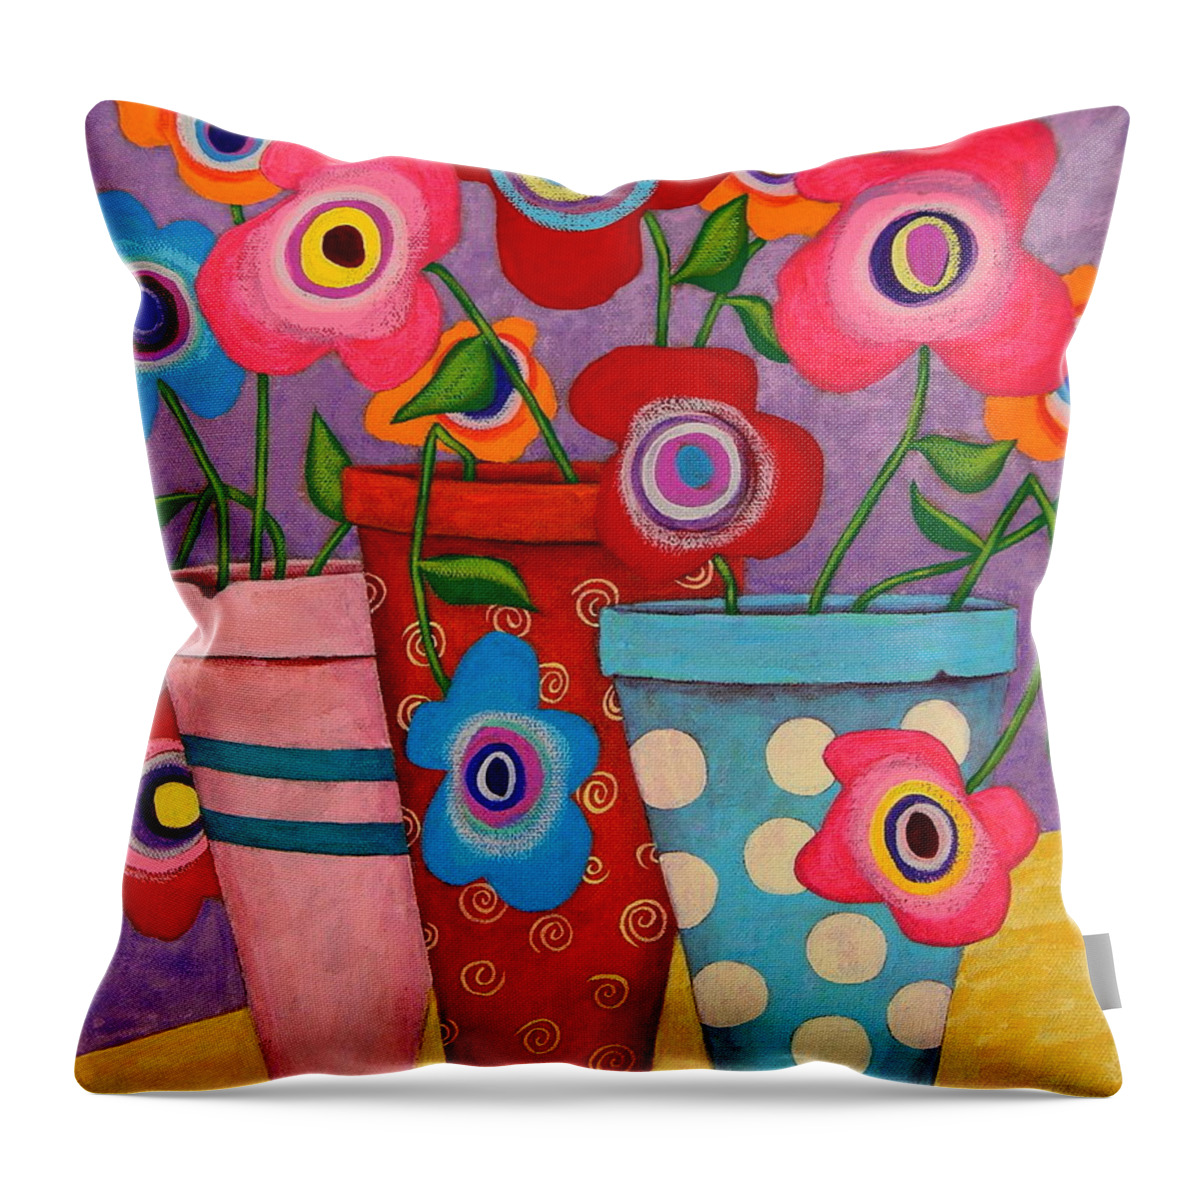 Modern Folk Art Flowers Throw Pillow featuring the painting Floral Happiness by John Blake